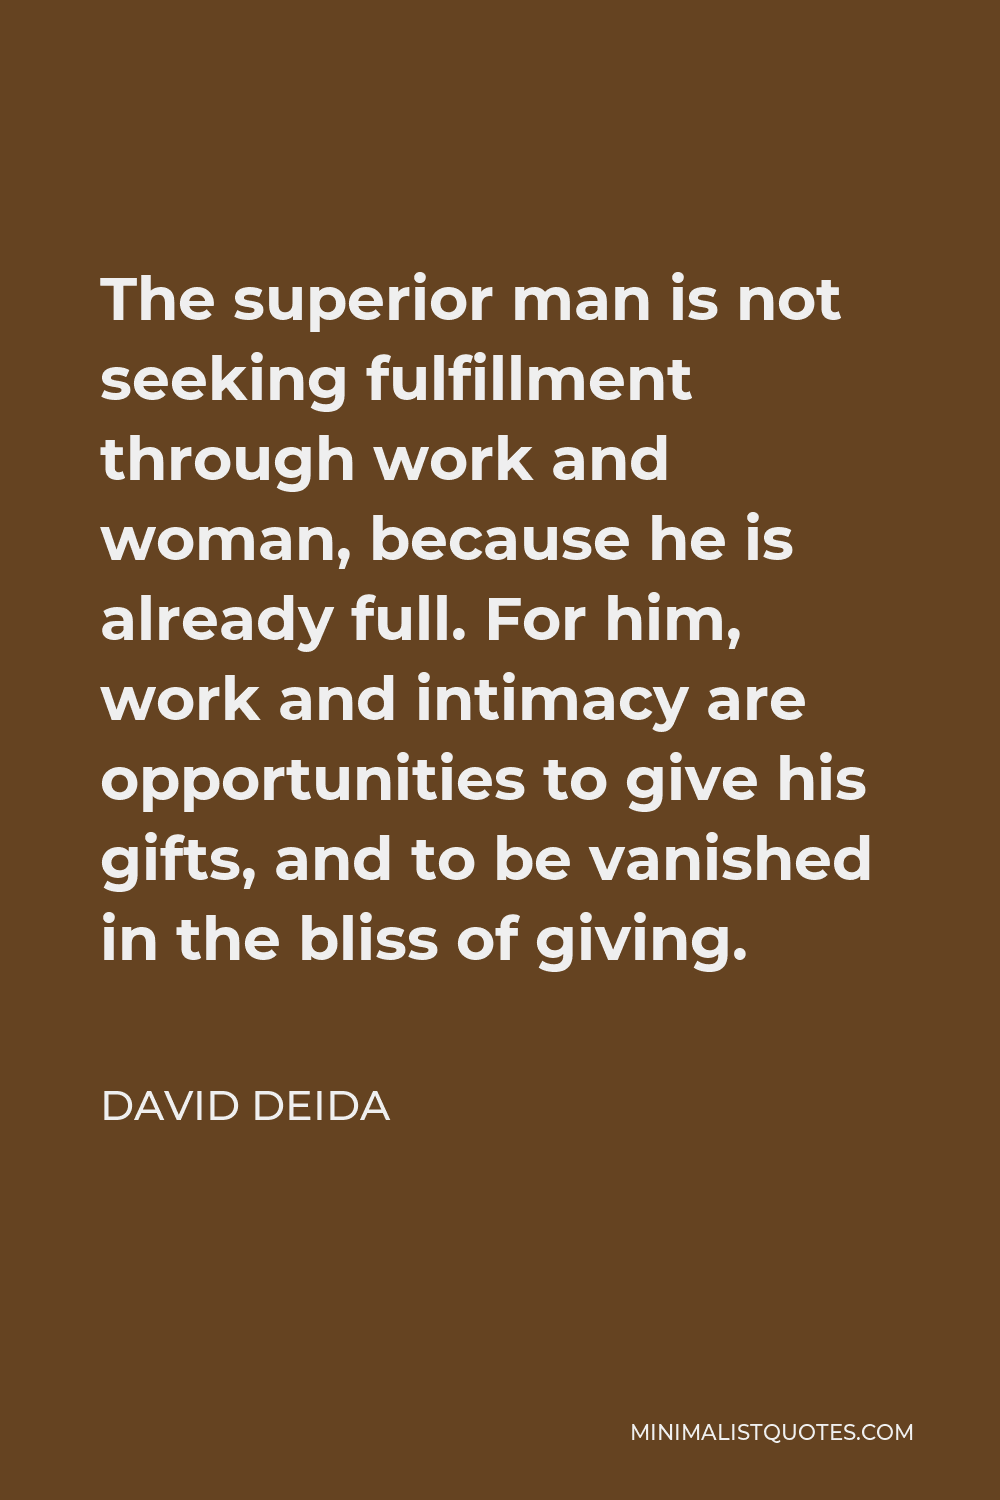 David Deida Quote - The superior man is not seeking fulfillment through work and woman, because he is already full. For him, work and intimacy are opportunities to give his gifts, and to be vanished in the bliss of giving.